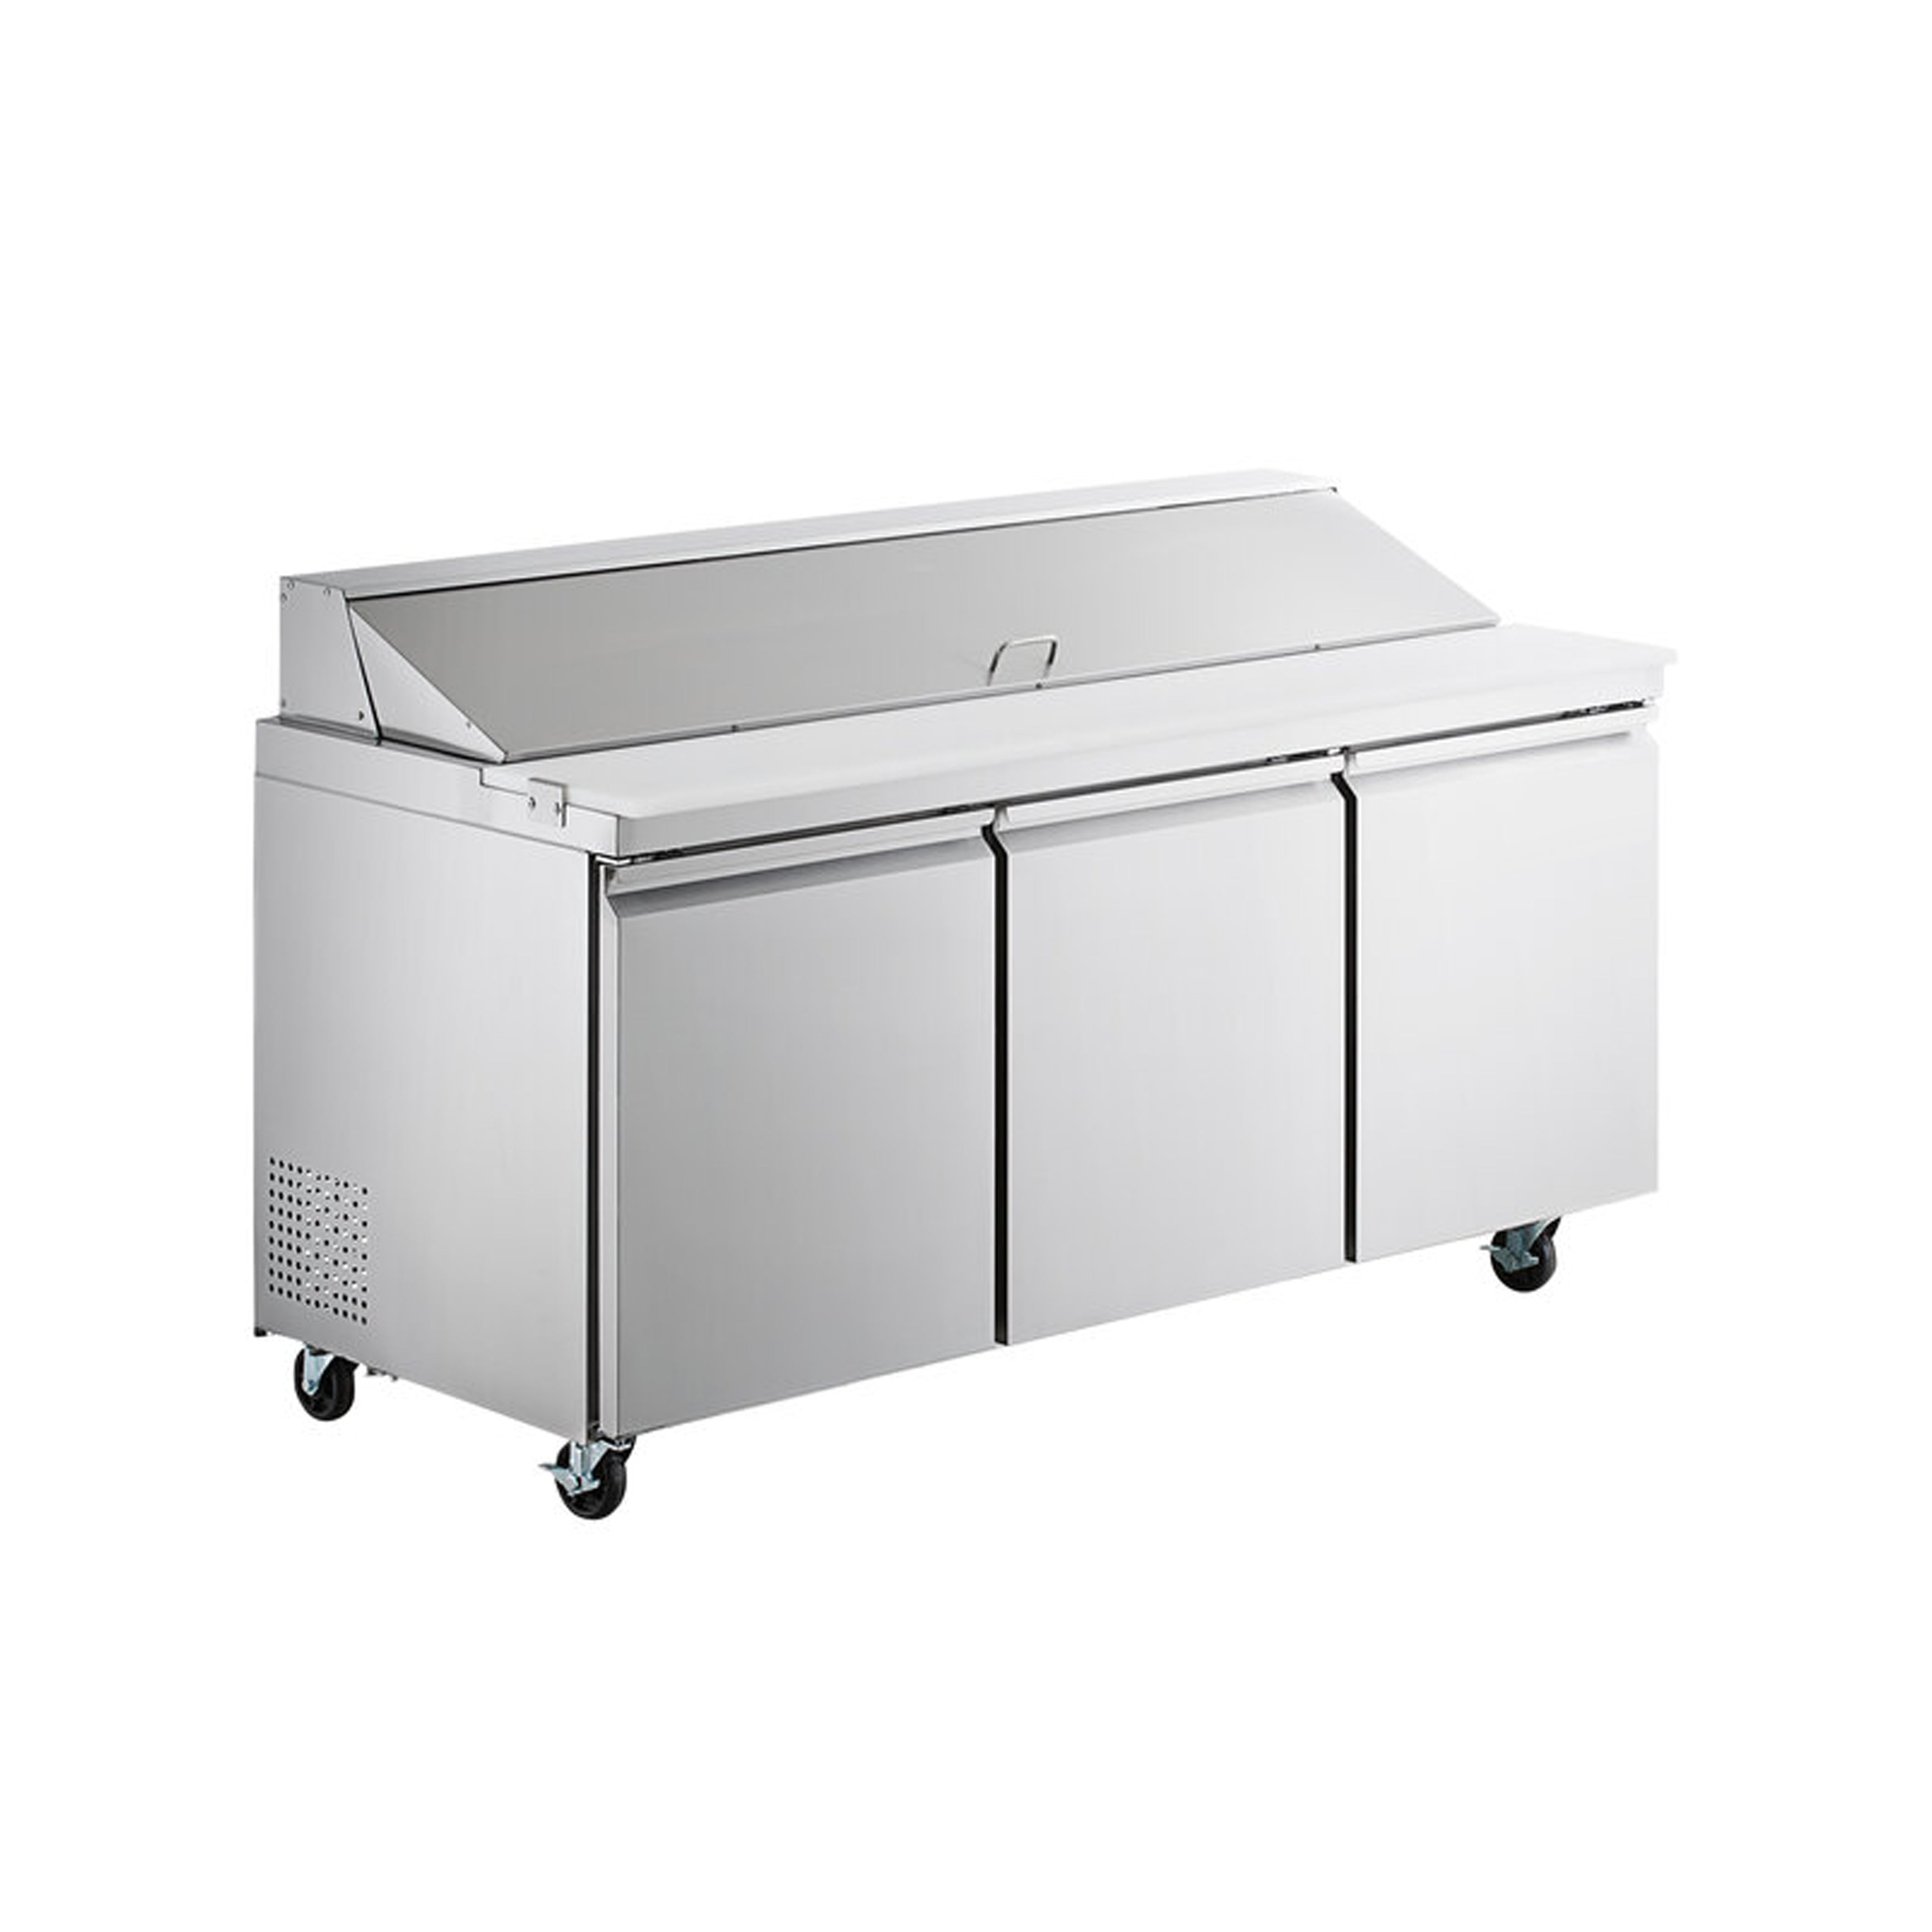 Chef AAA - SS-PT-70-HC, Commercial 70" Sandwich Prep Table 3 Door Stainless Steel Refrigerator 15.5 cu.ft.